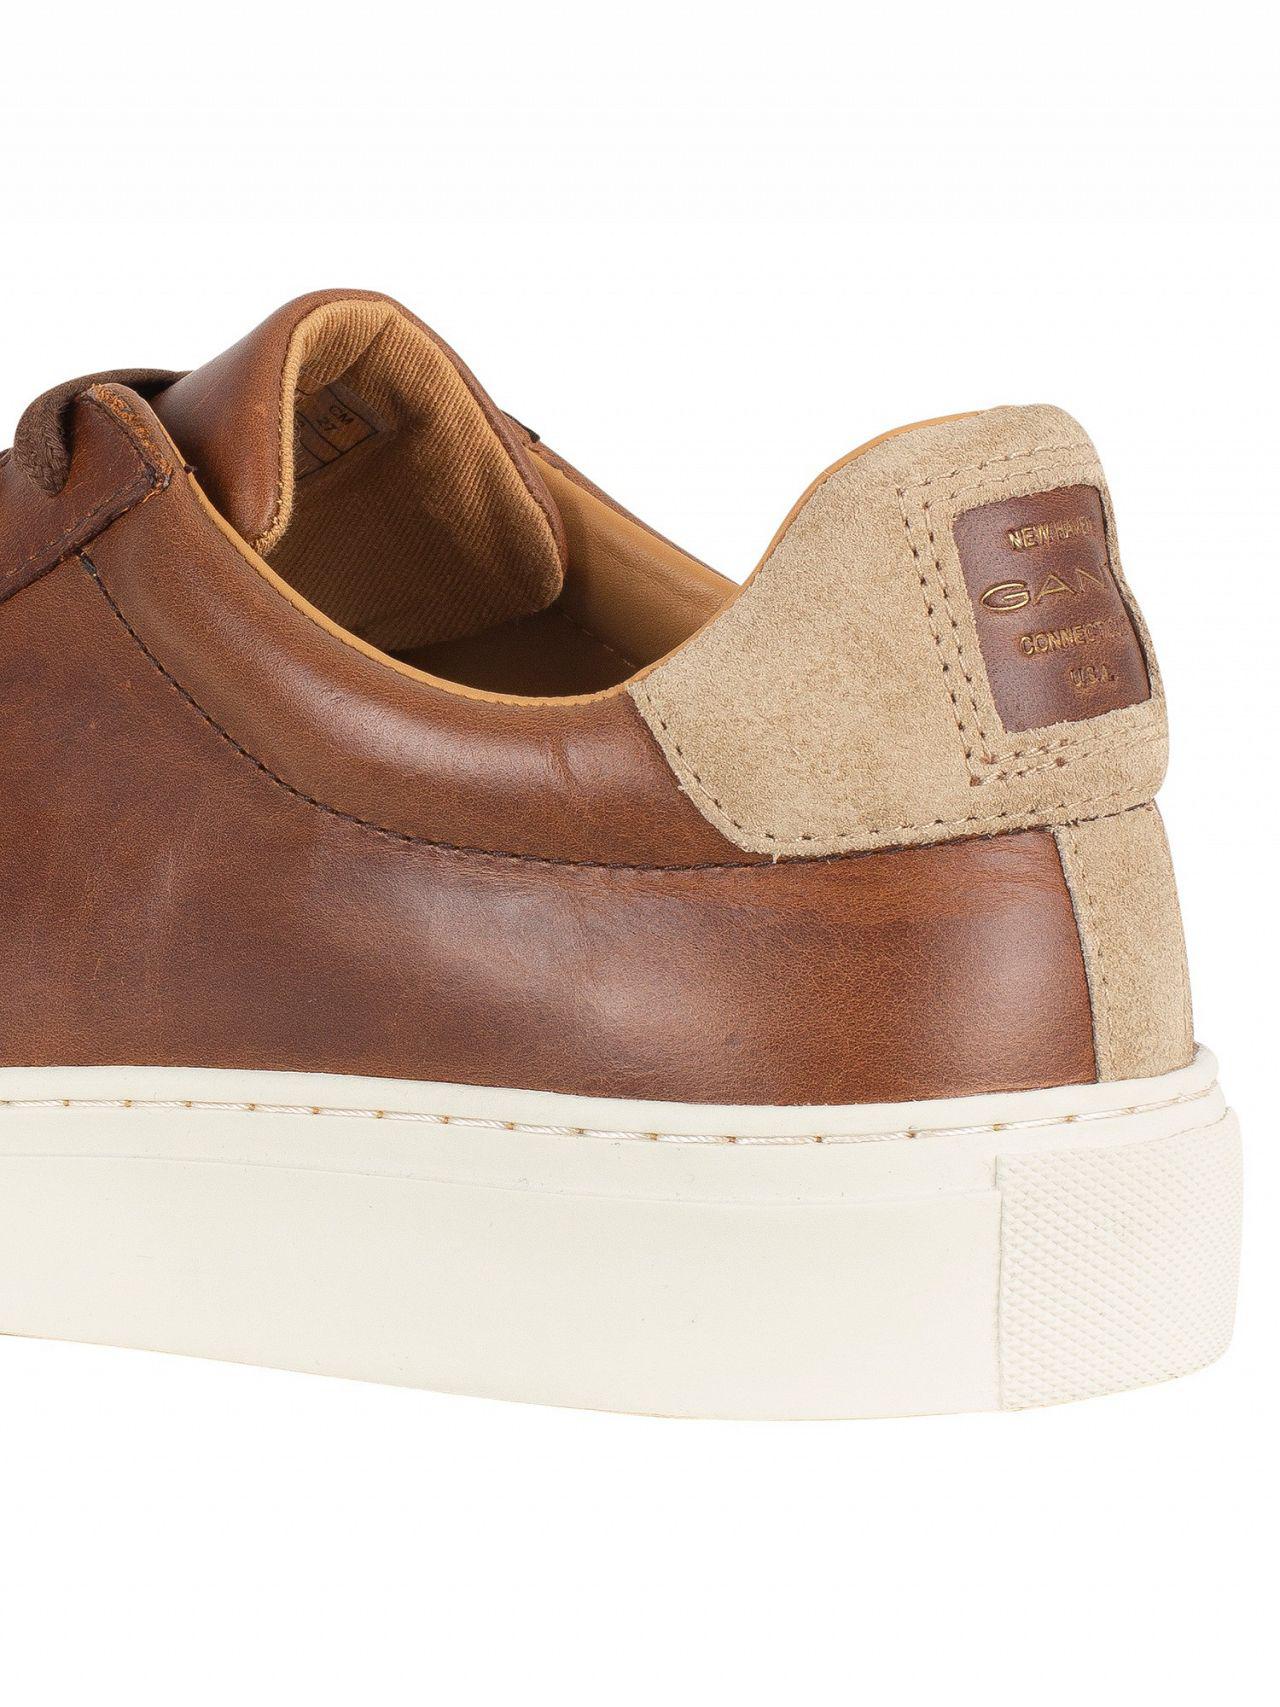 GANT Cognac Major Leather Trainers in Brown for Men - Lyst